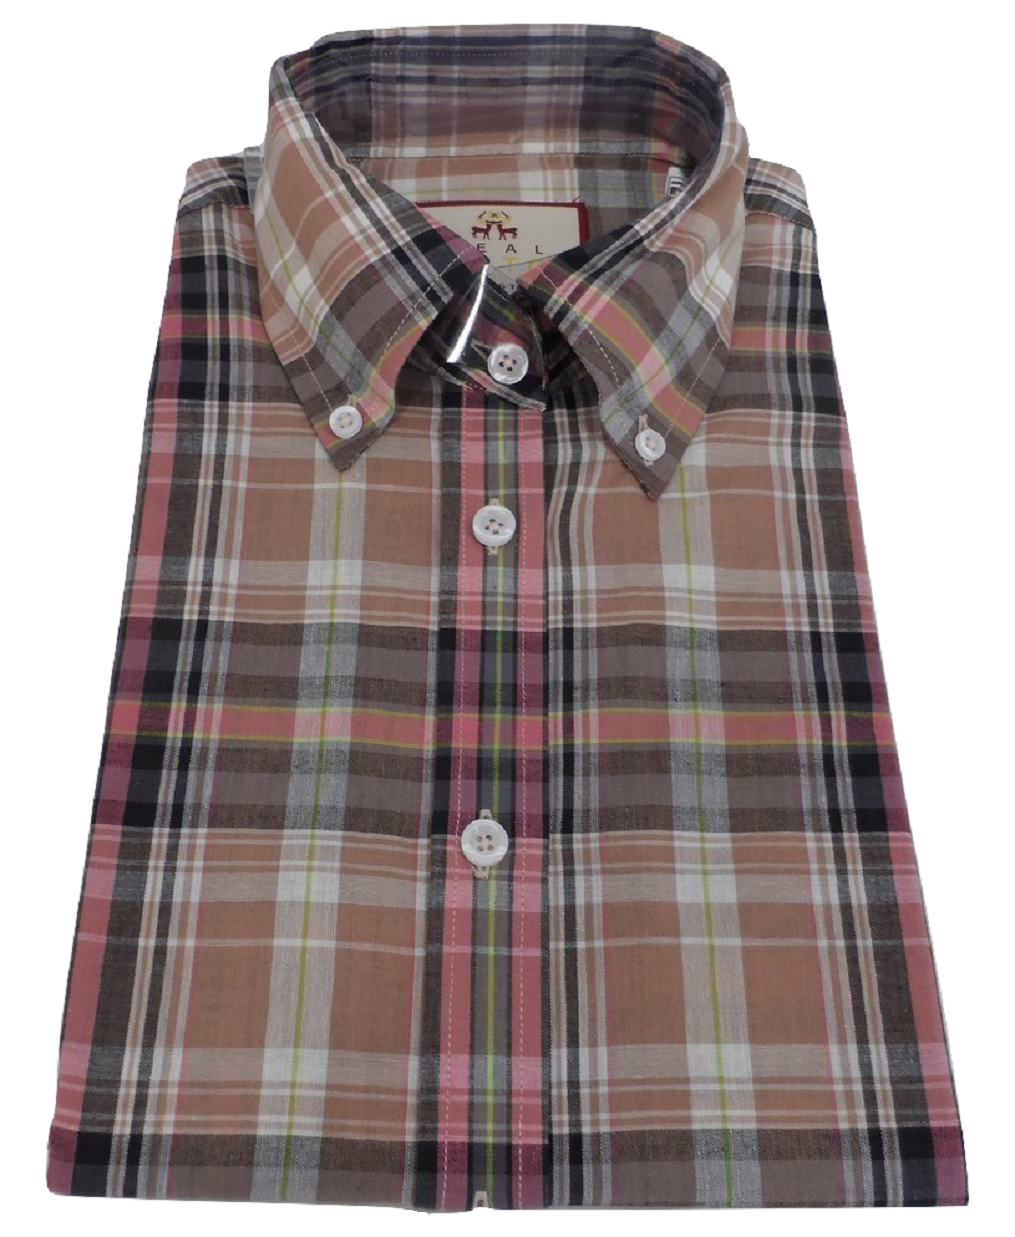 Real Hoxton Ladies Purple Checked Button Down Short Sleeved Shirts